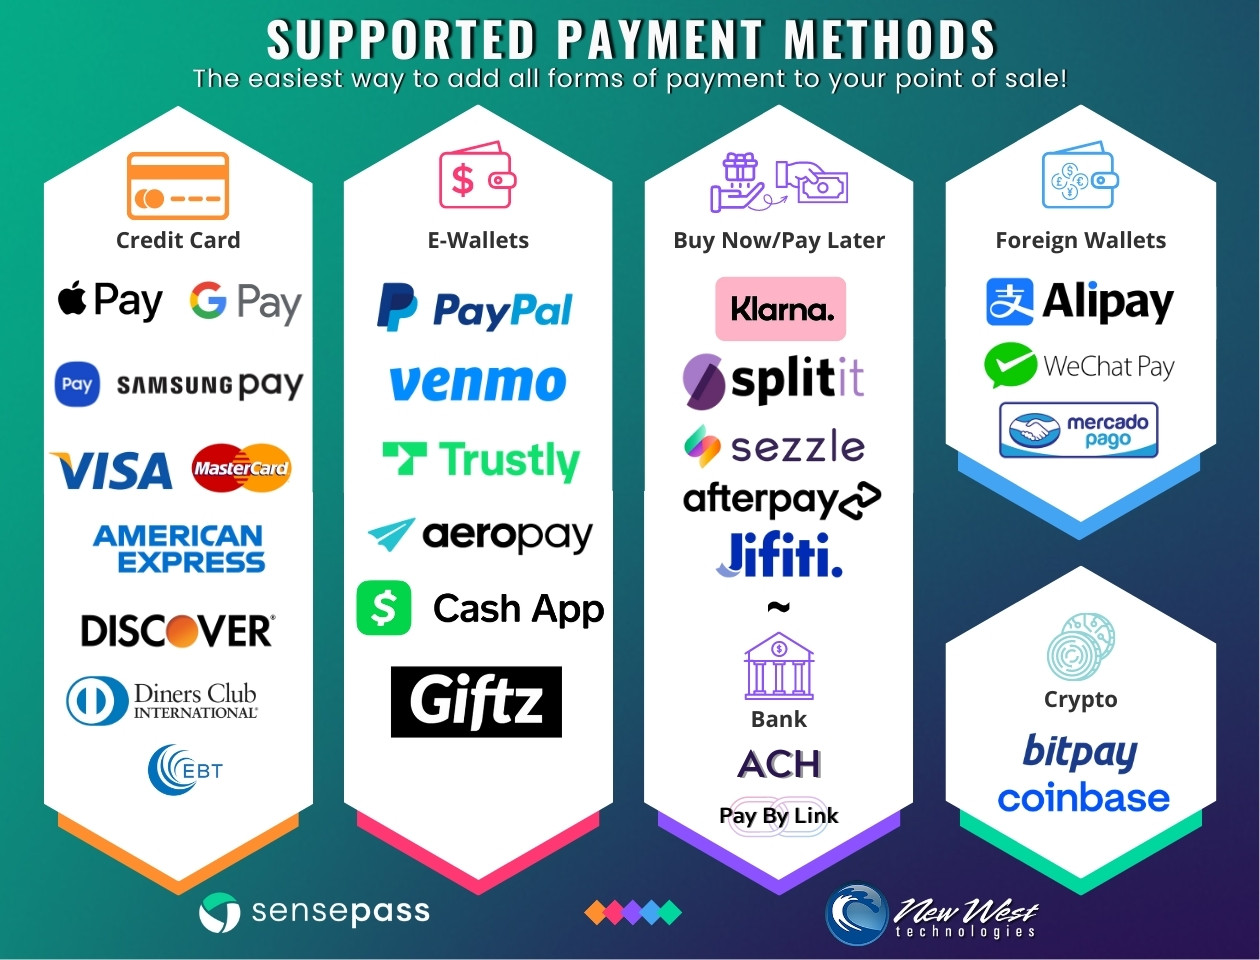 SensePass Payments - Supported Methods